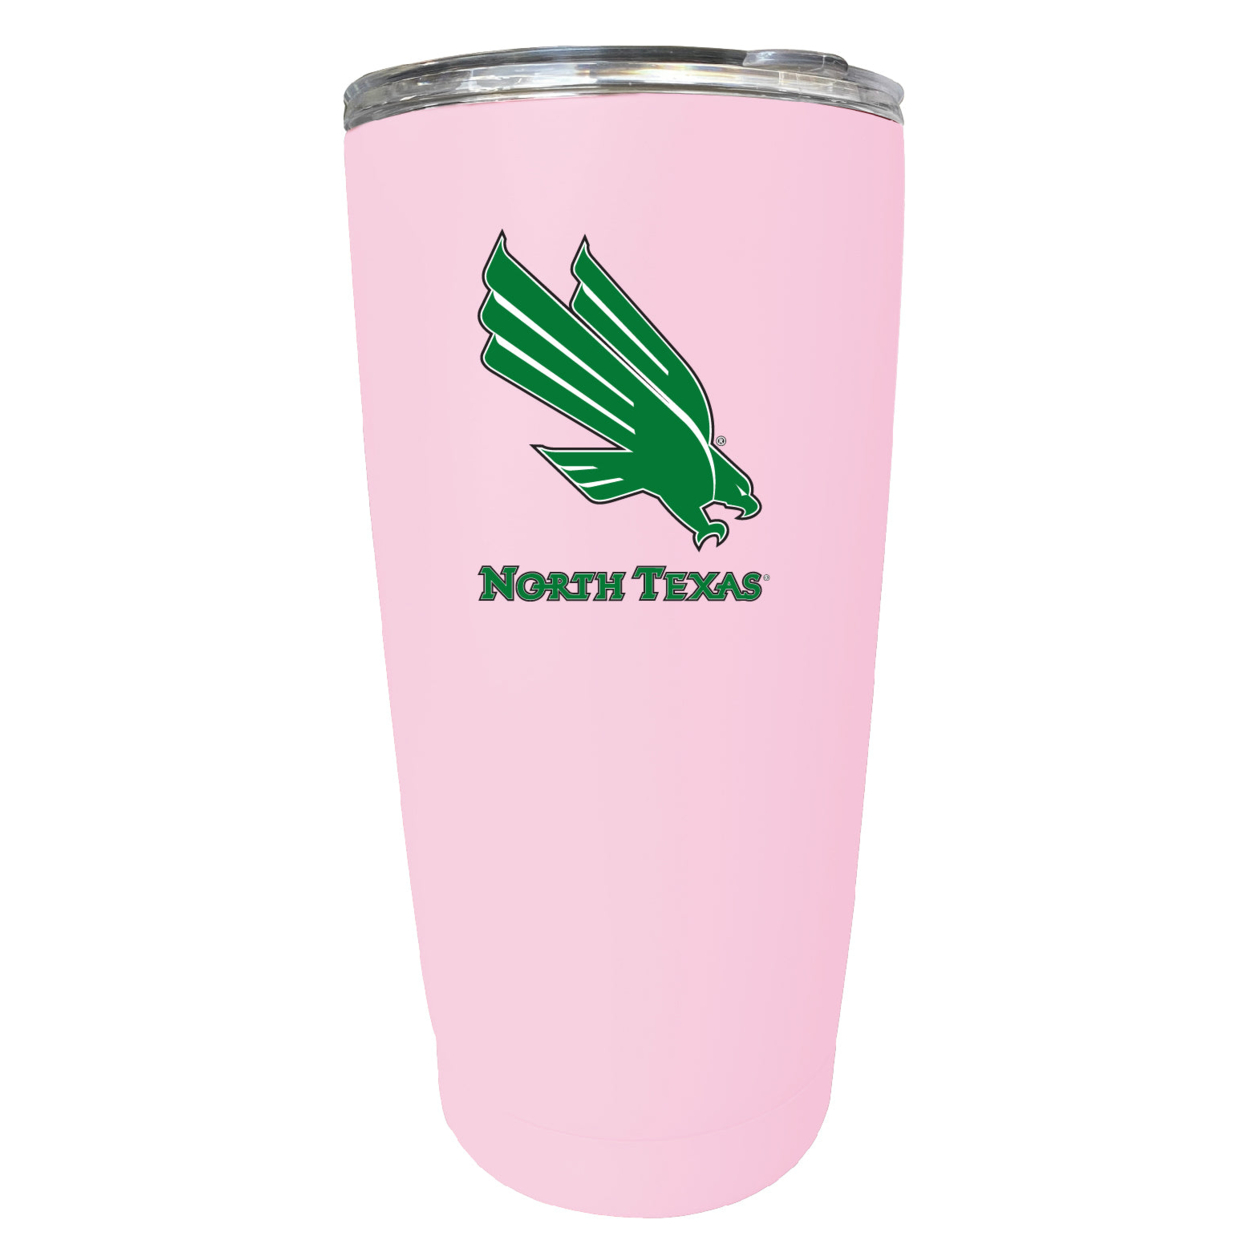 North Texas 16 Oz Stainless Steel Insulated Tumbler - Pink